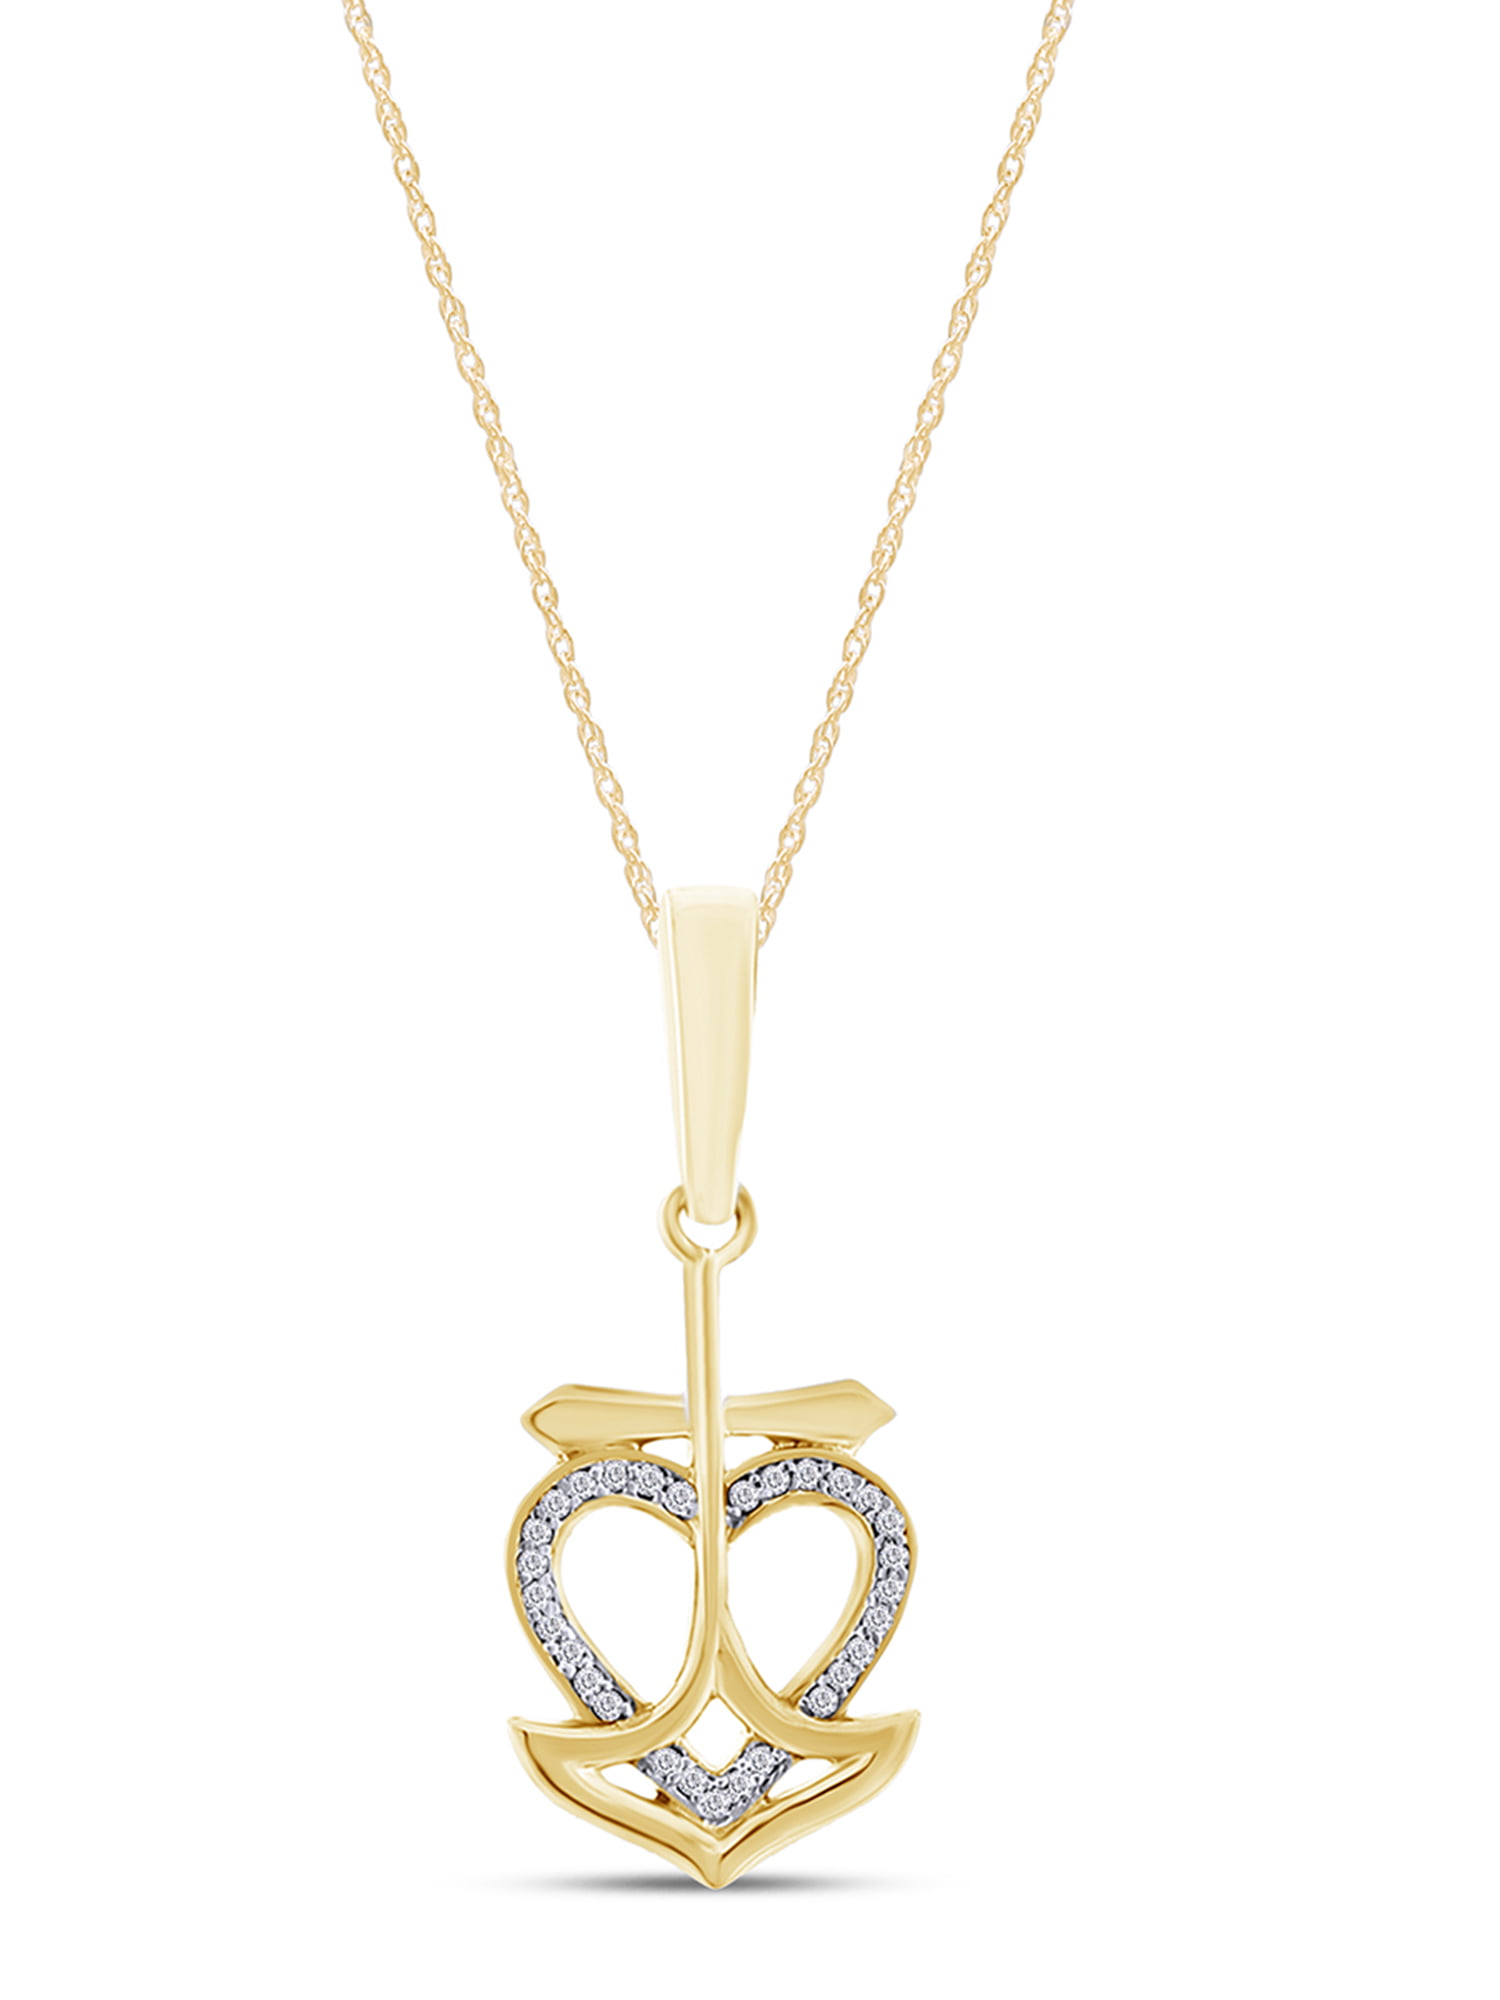 Sterling Silver and 14k Yellow Gold Diamond Cross and Heart Pendant Necklace 18 